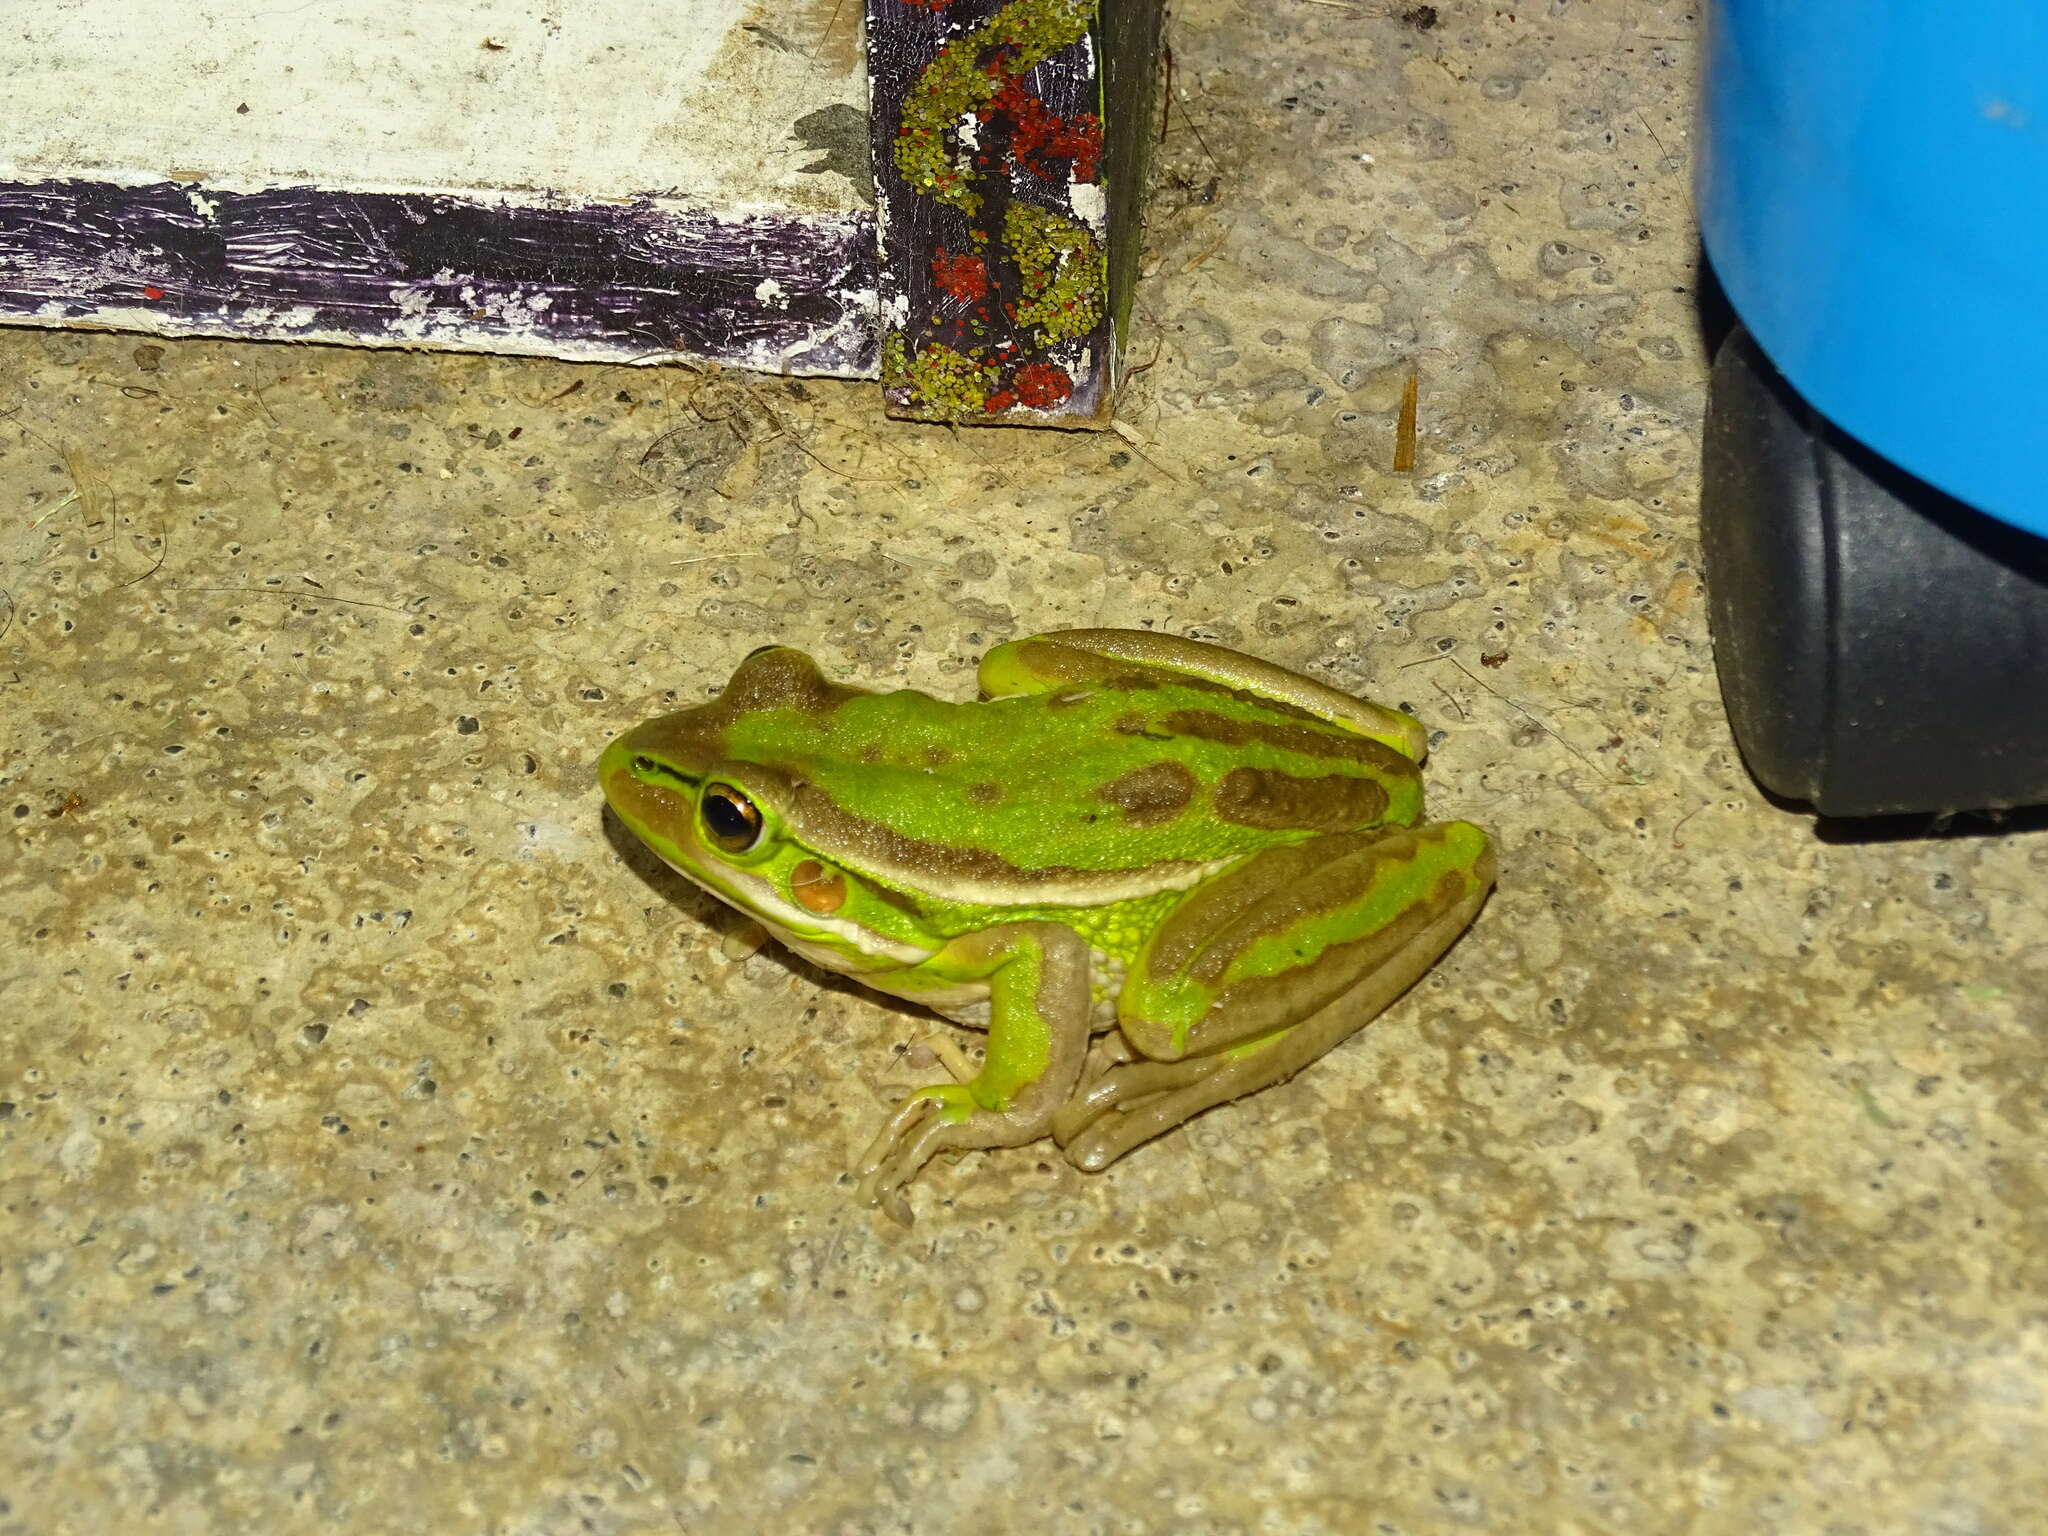 Image of Green and golden bell frog